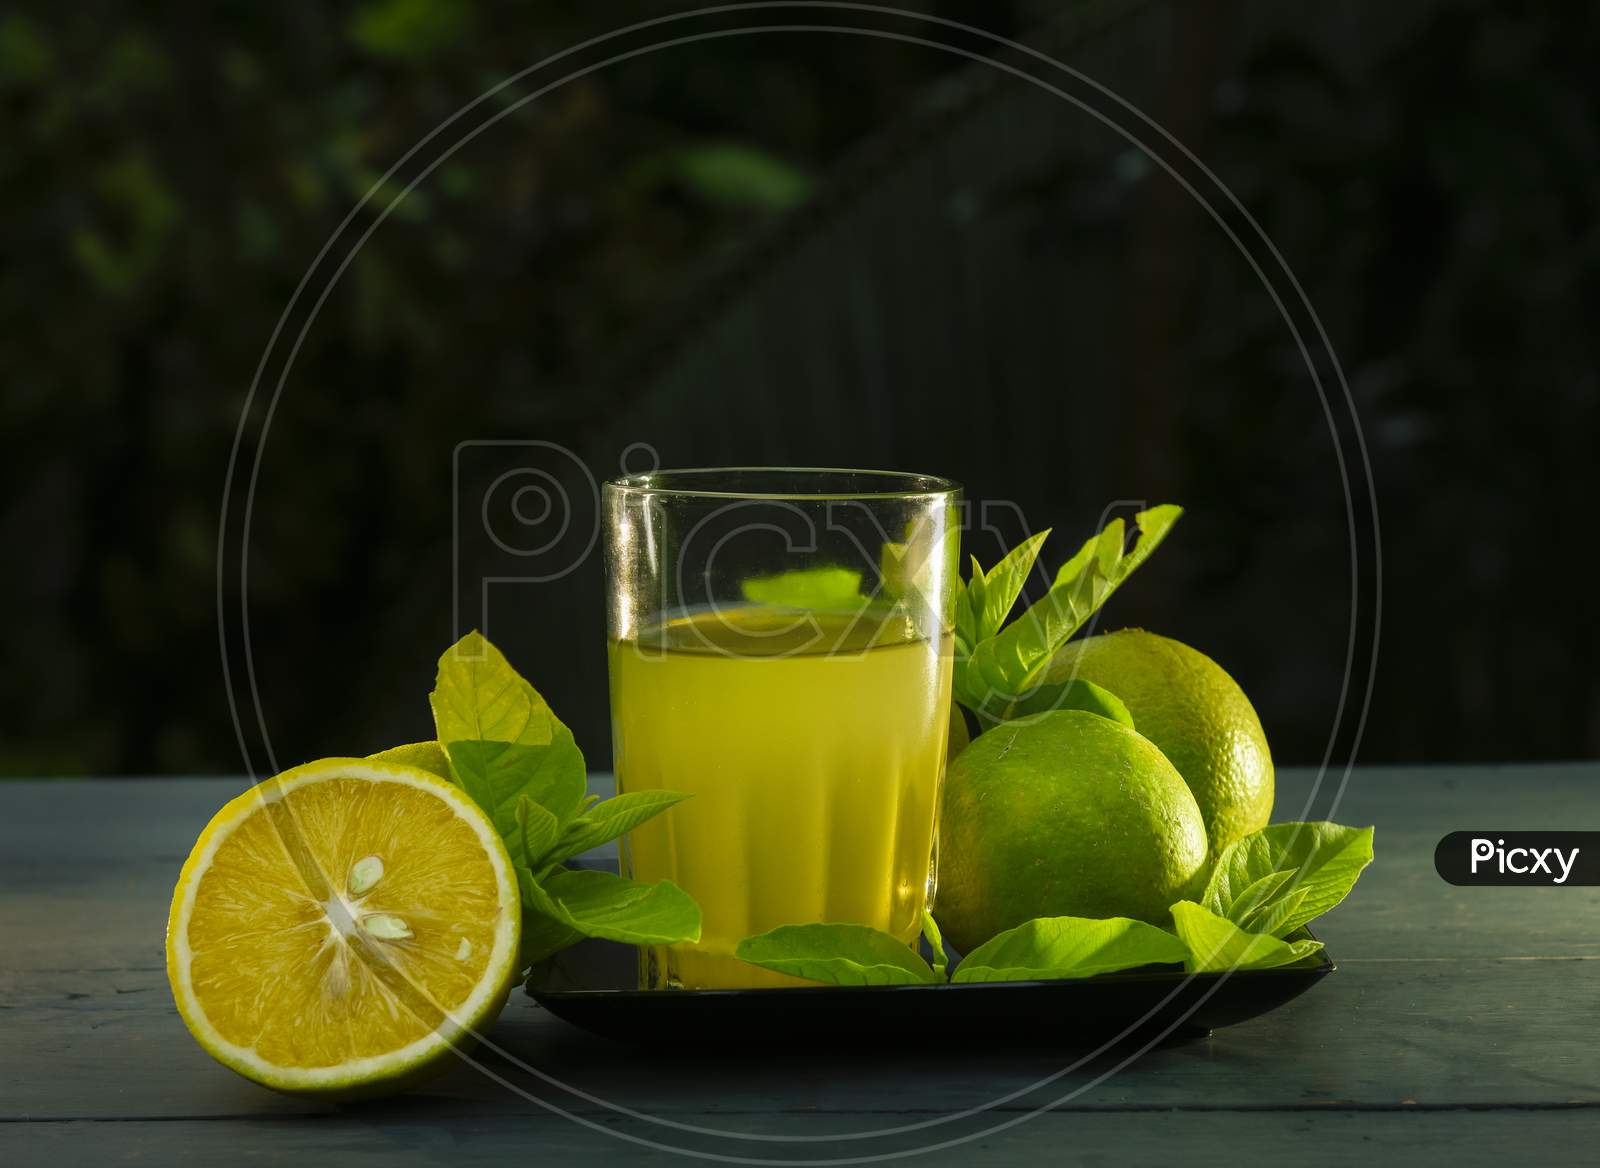 Glass of orange juice and oranges on wooden background